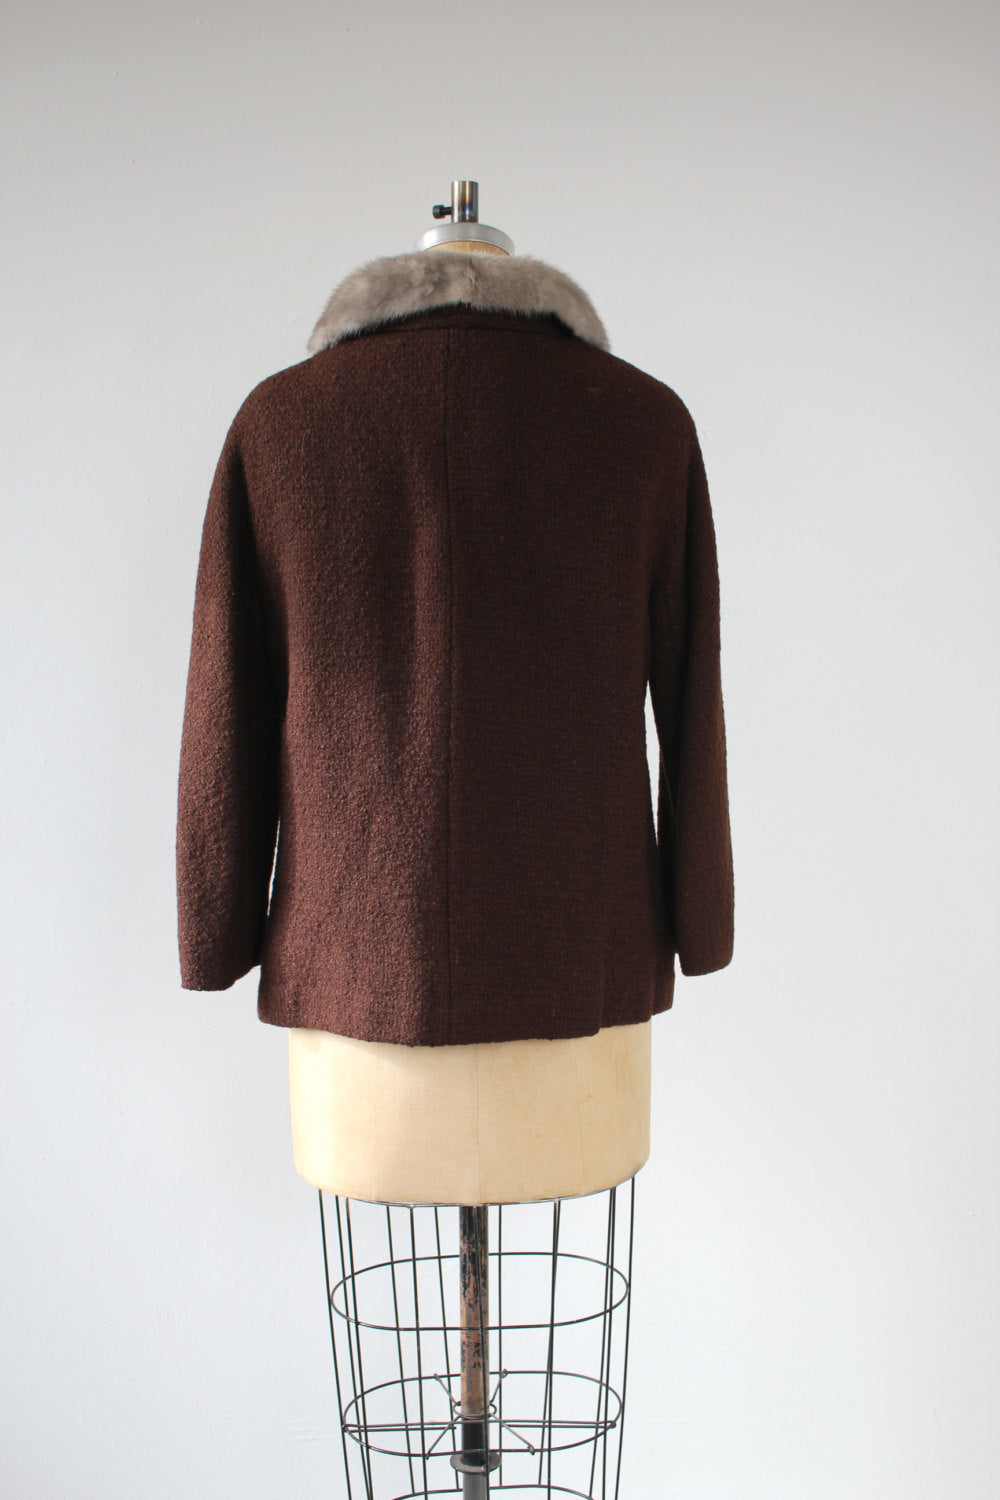 Vintage 60s Brown Boucle Wool Jacket with Silver Mink Collar | Shop ...